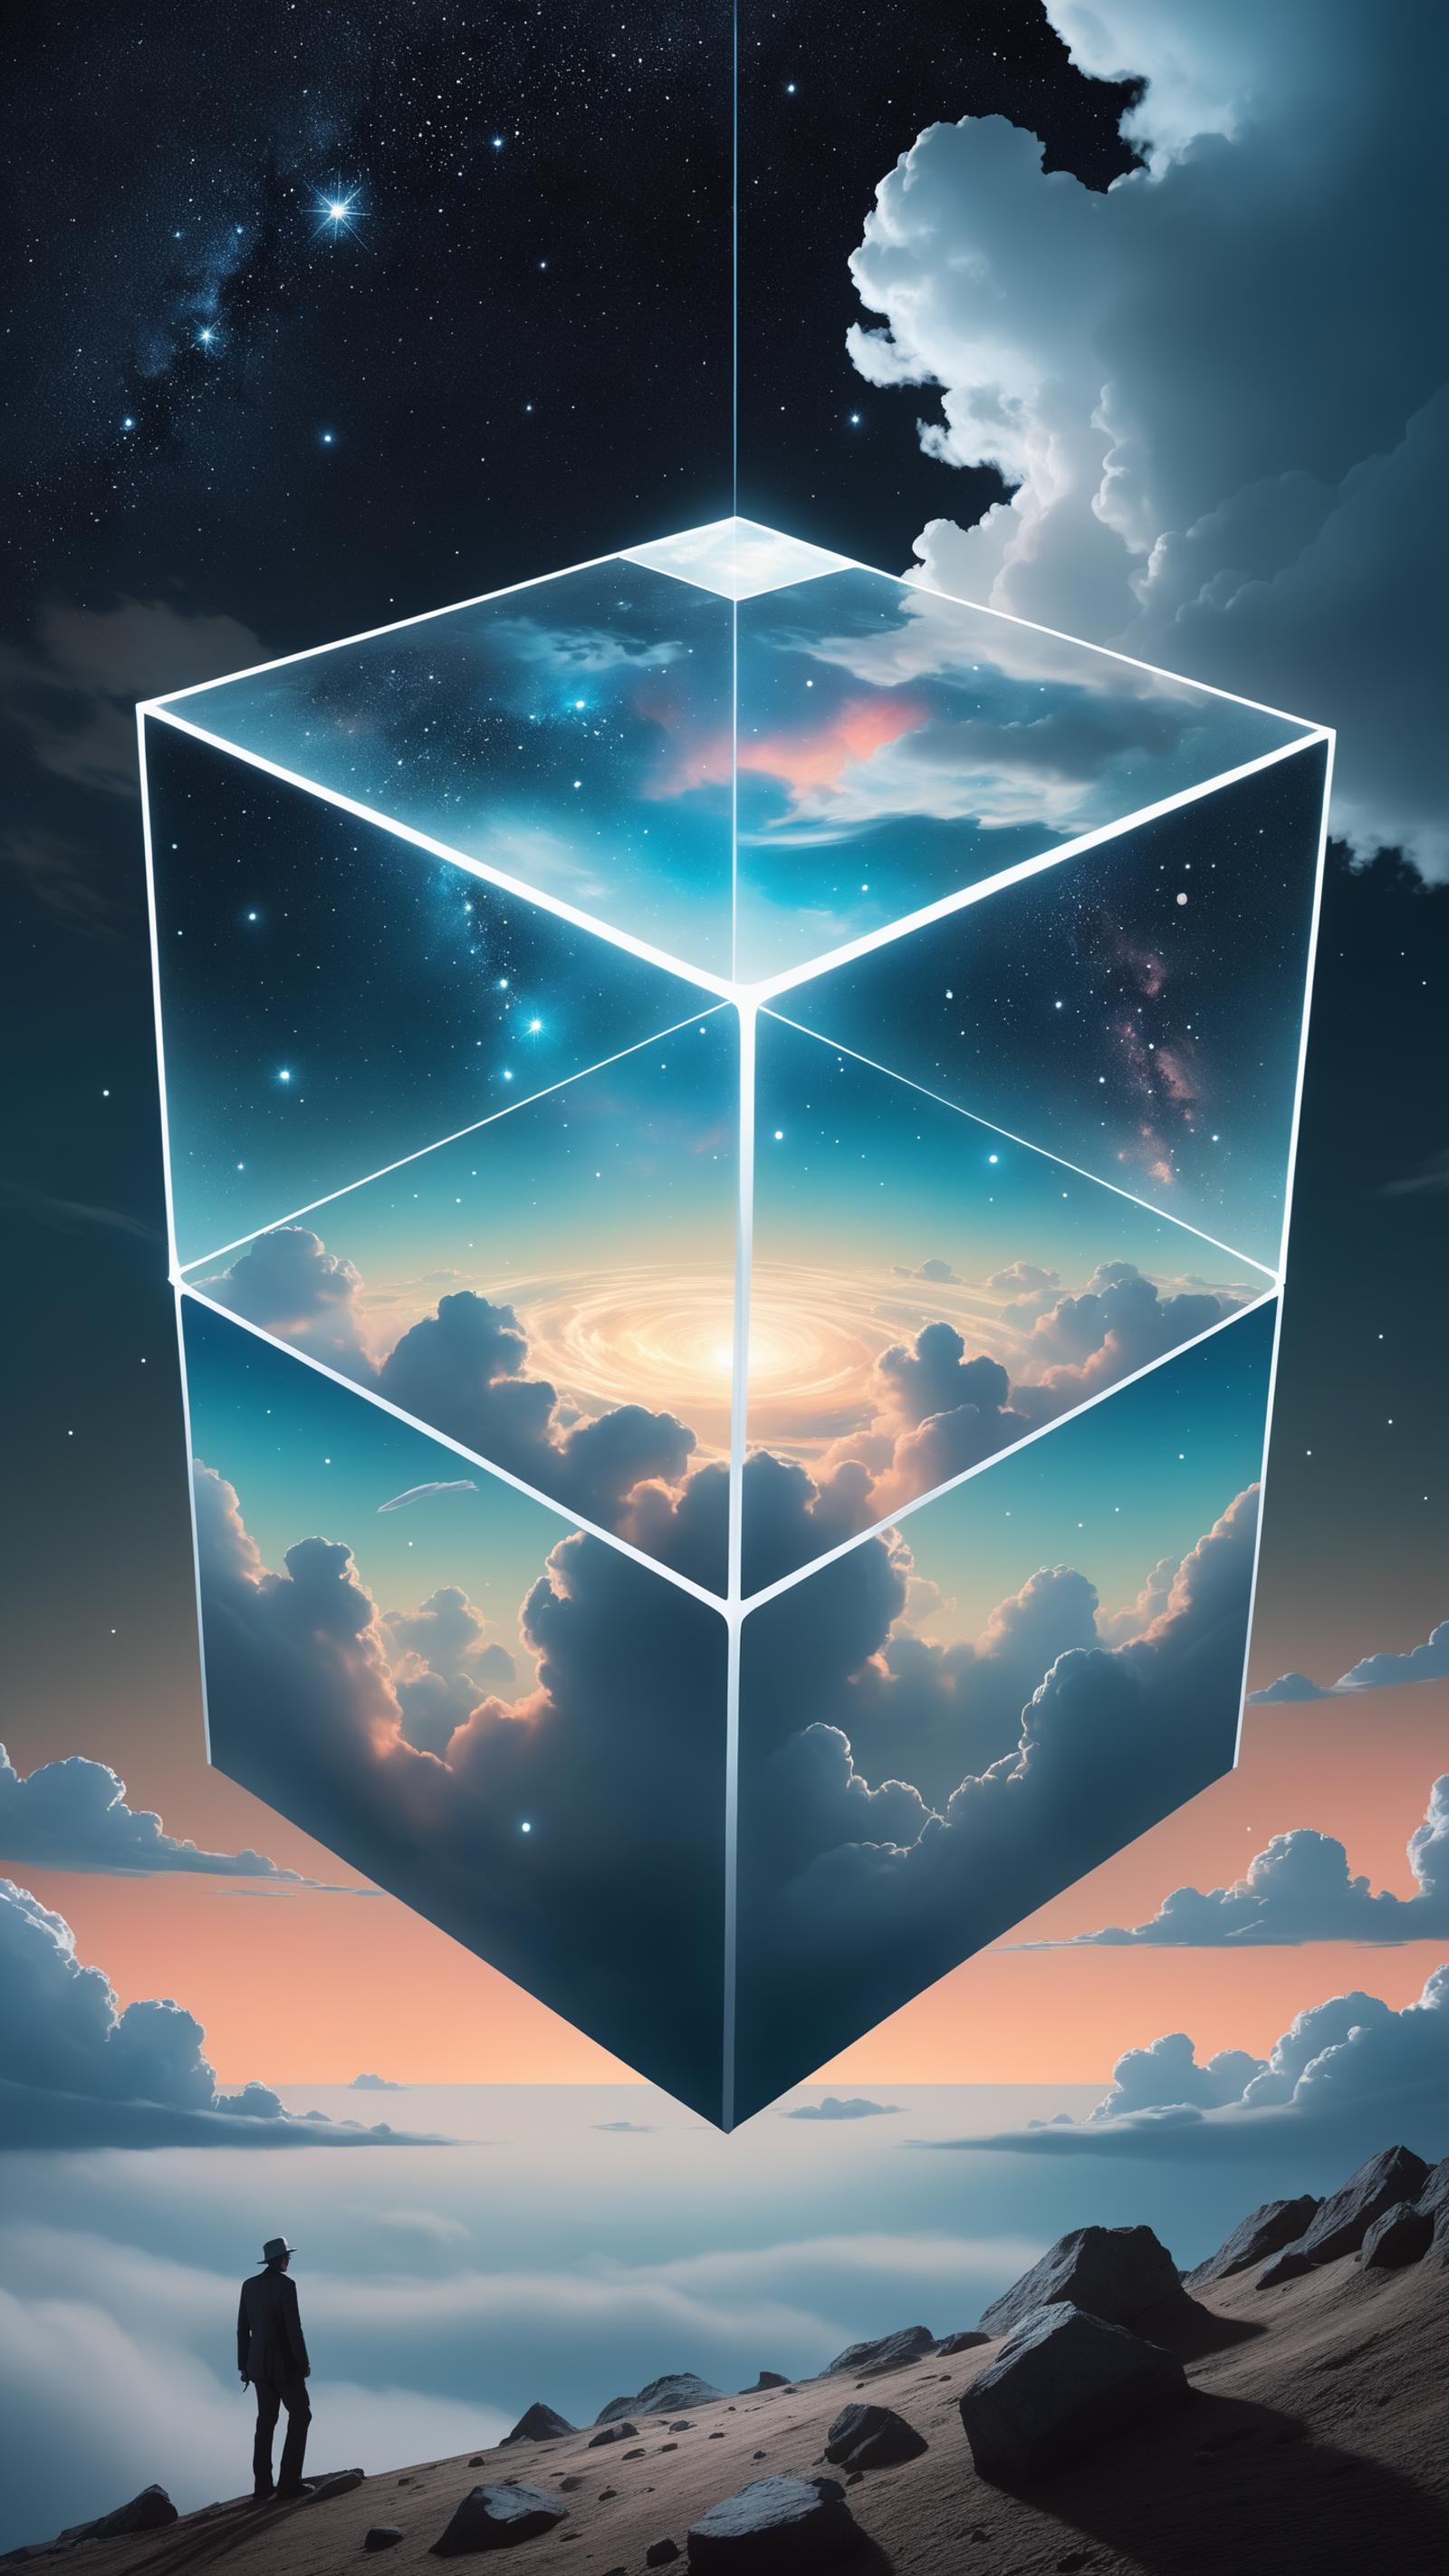 A cube-shaped artwork with a blue sky, clouds, and stars inside. The cube's sides feature different colors, including pink and purple.